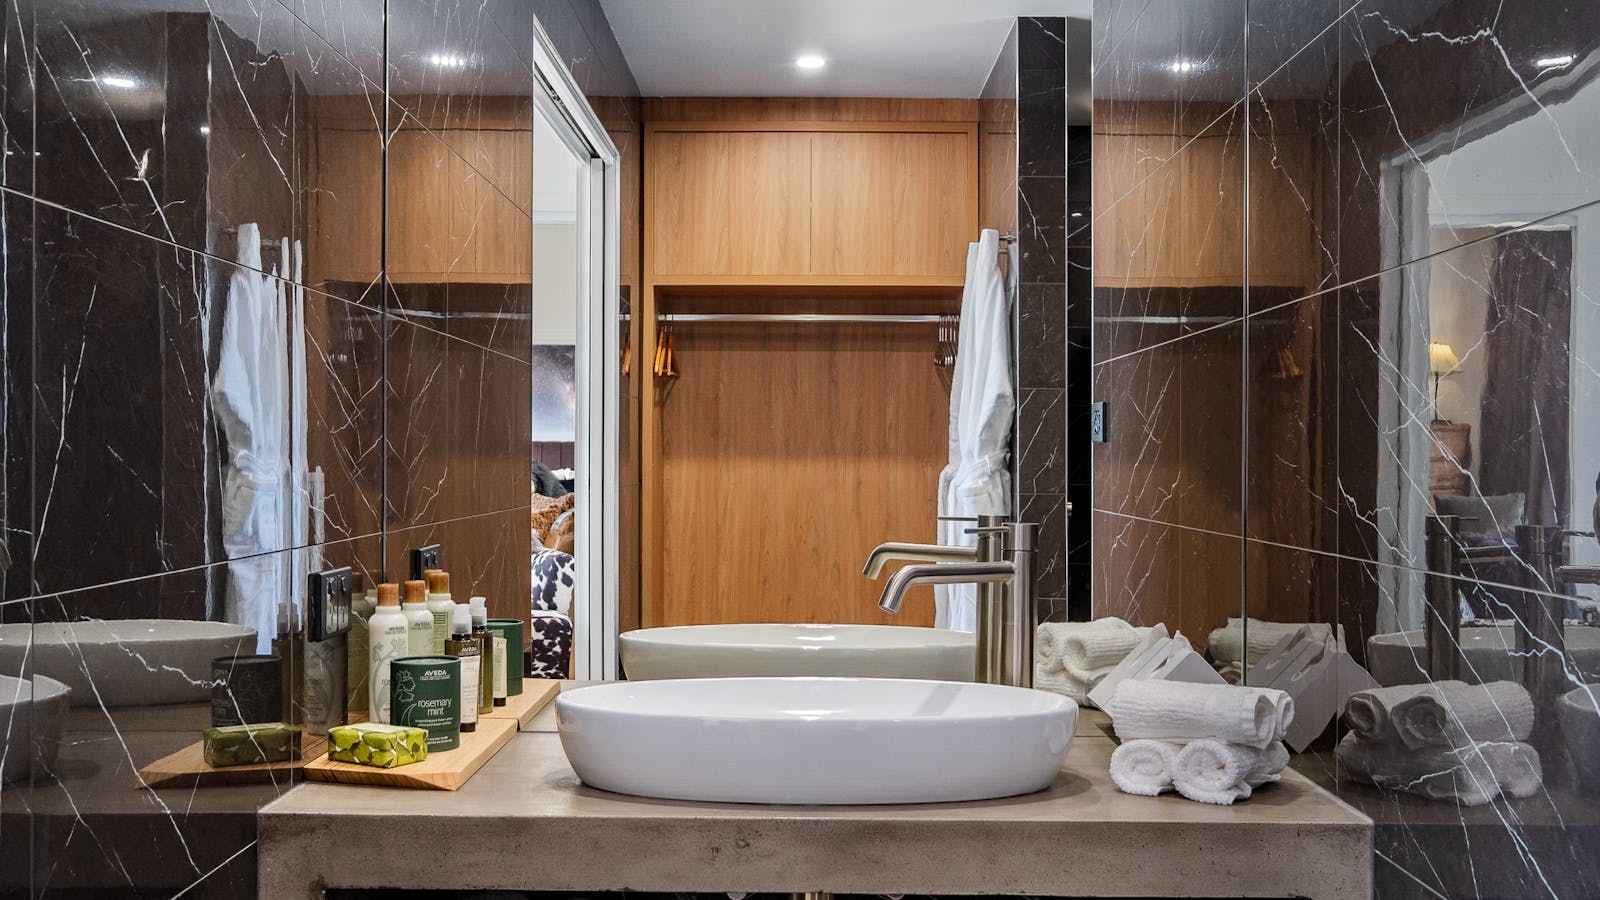 Luxuriously appointed bathroom